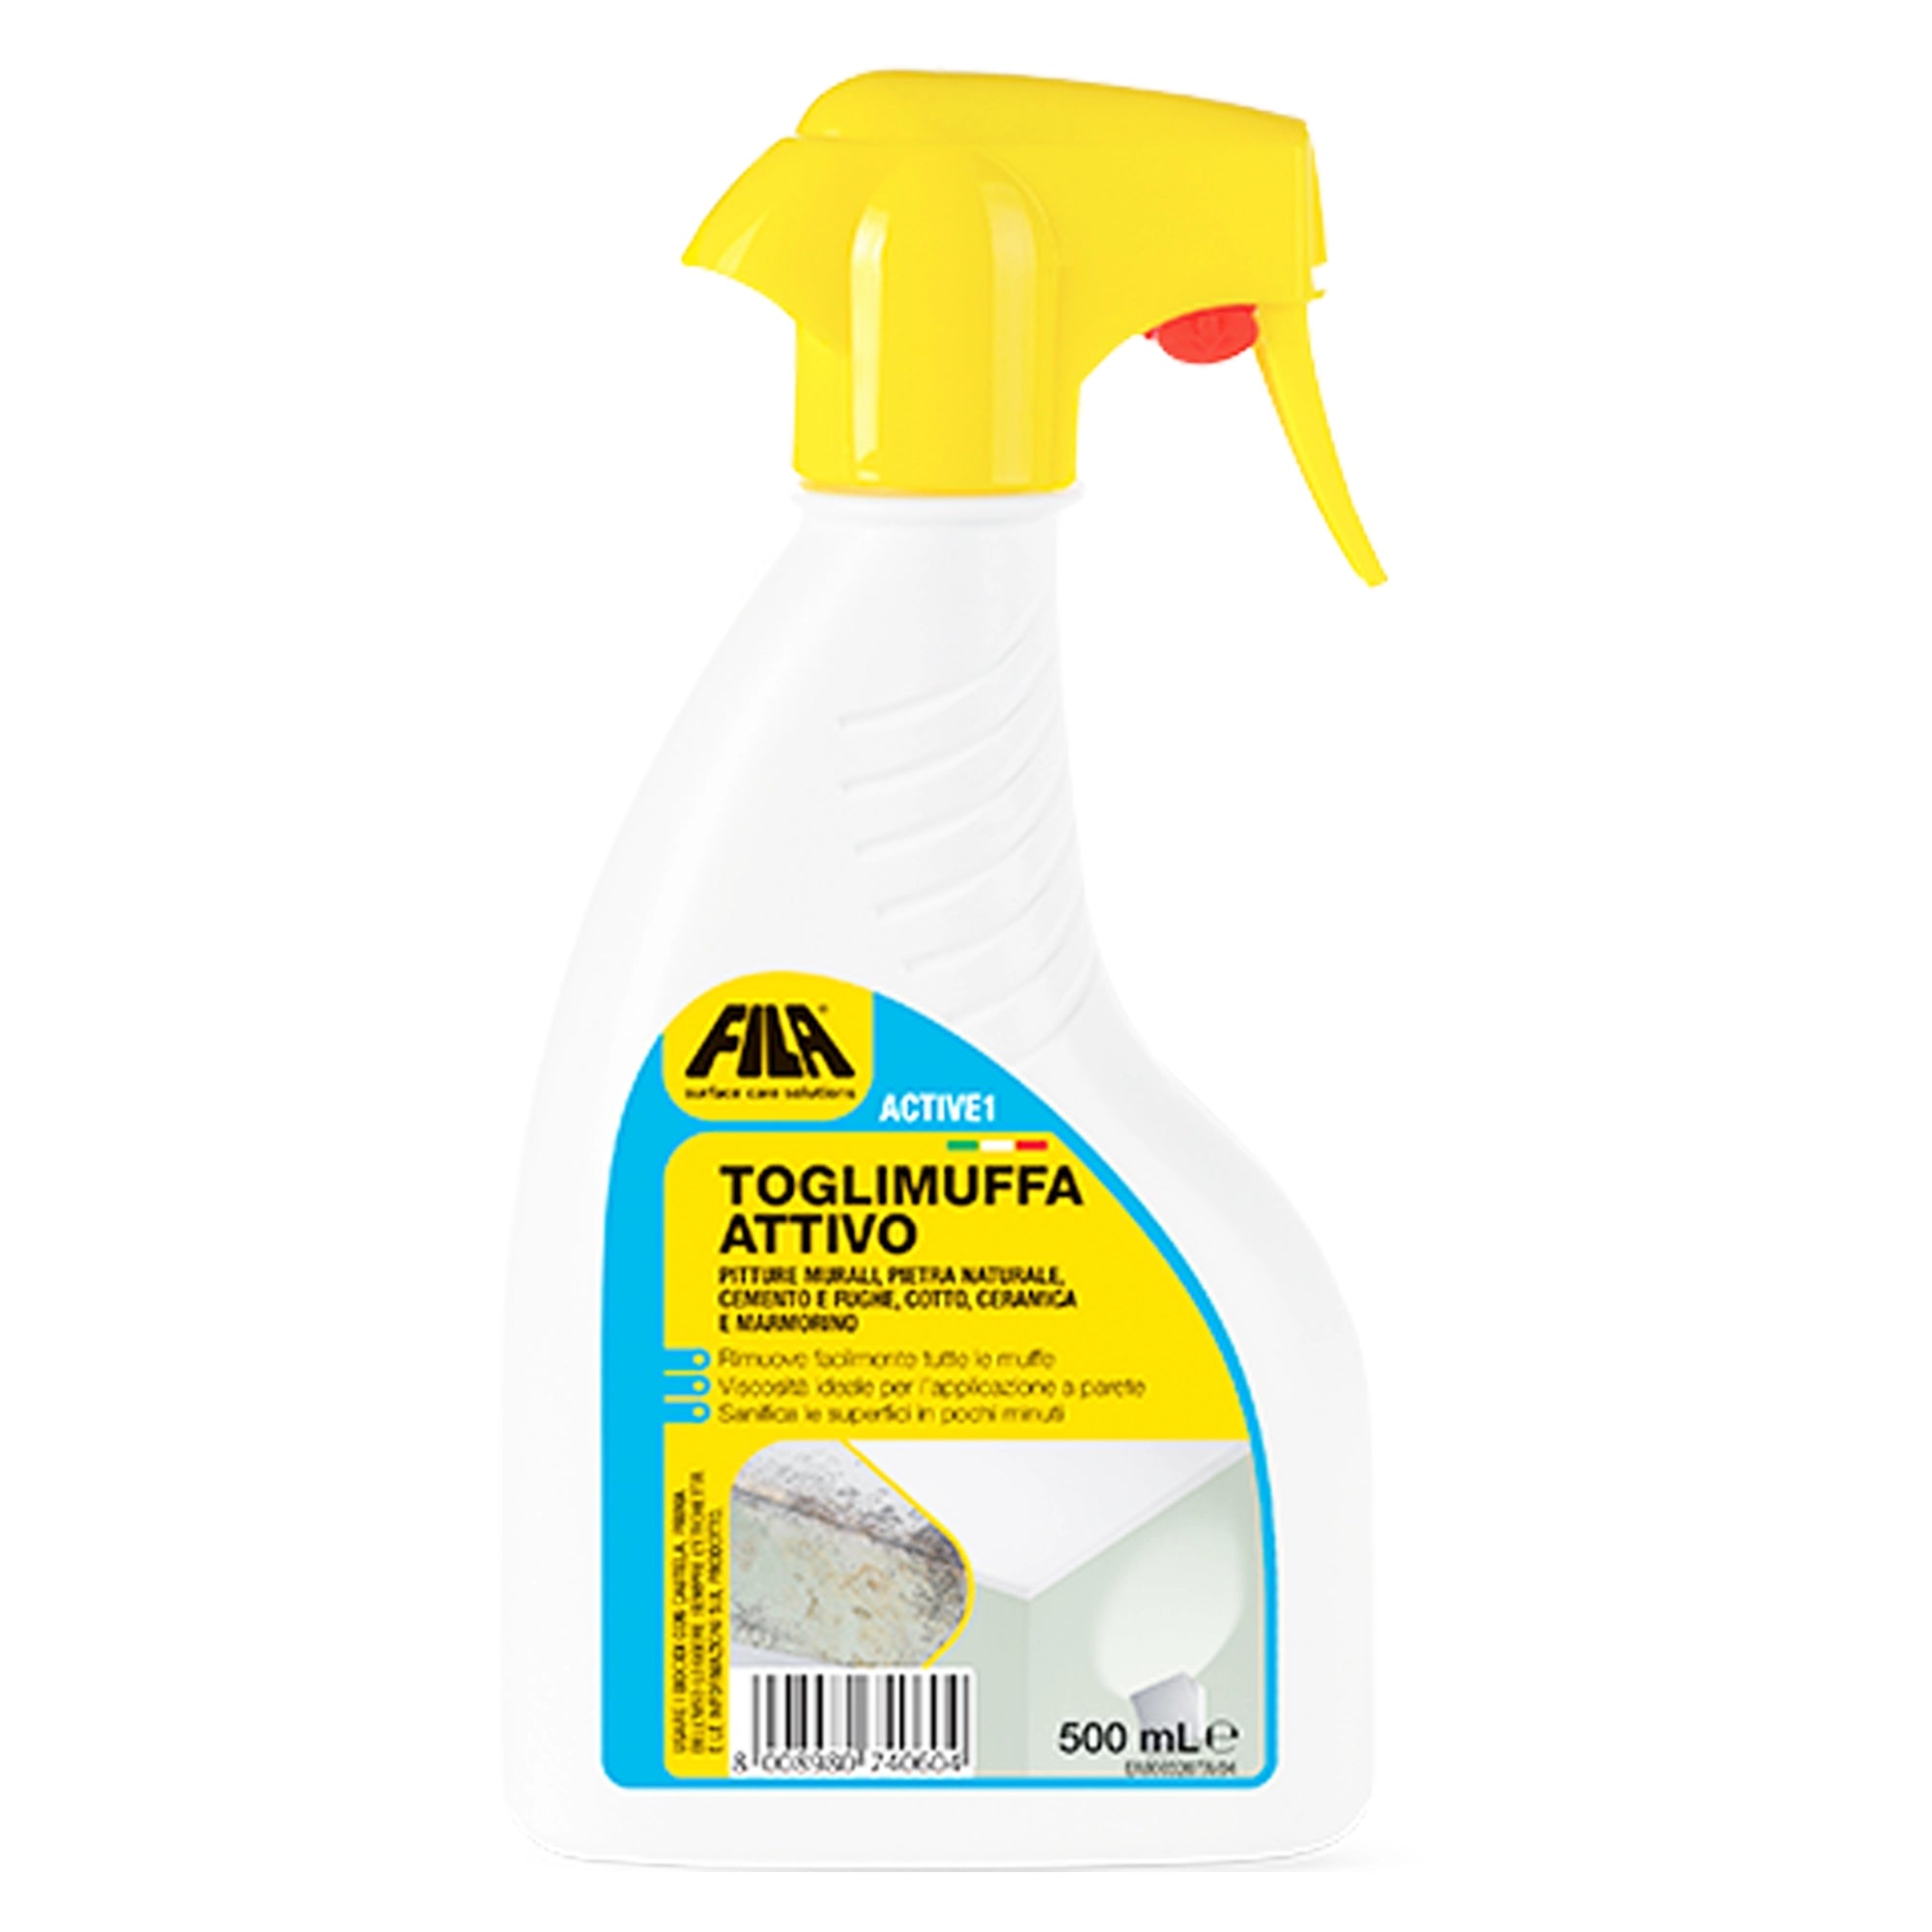 Fila Active 1 Mold Cleaner 500 ml